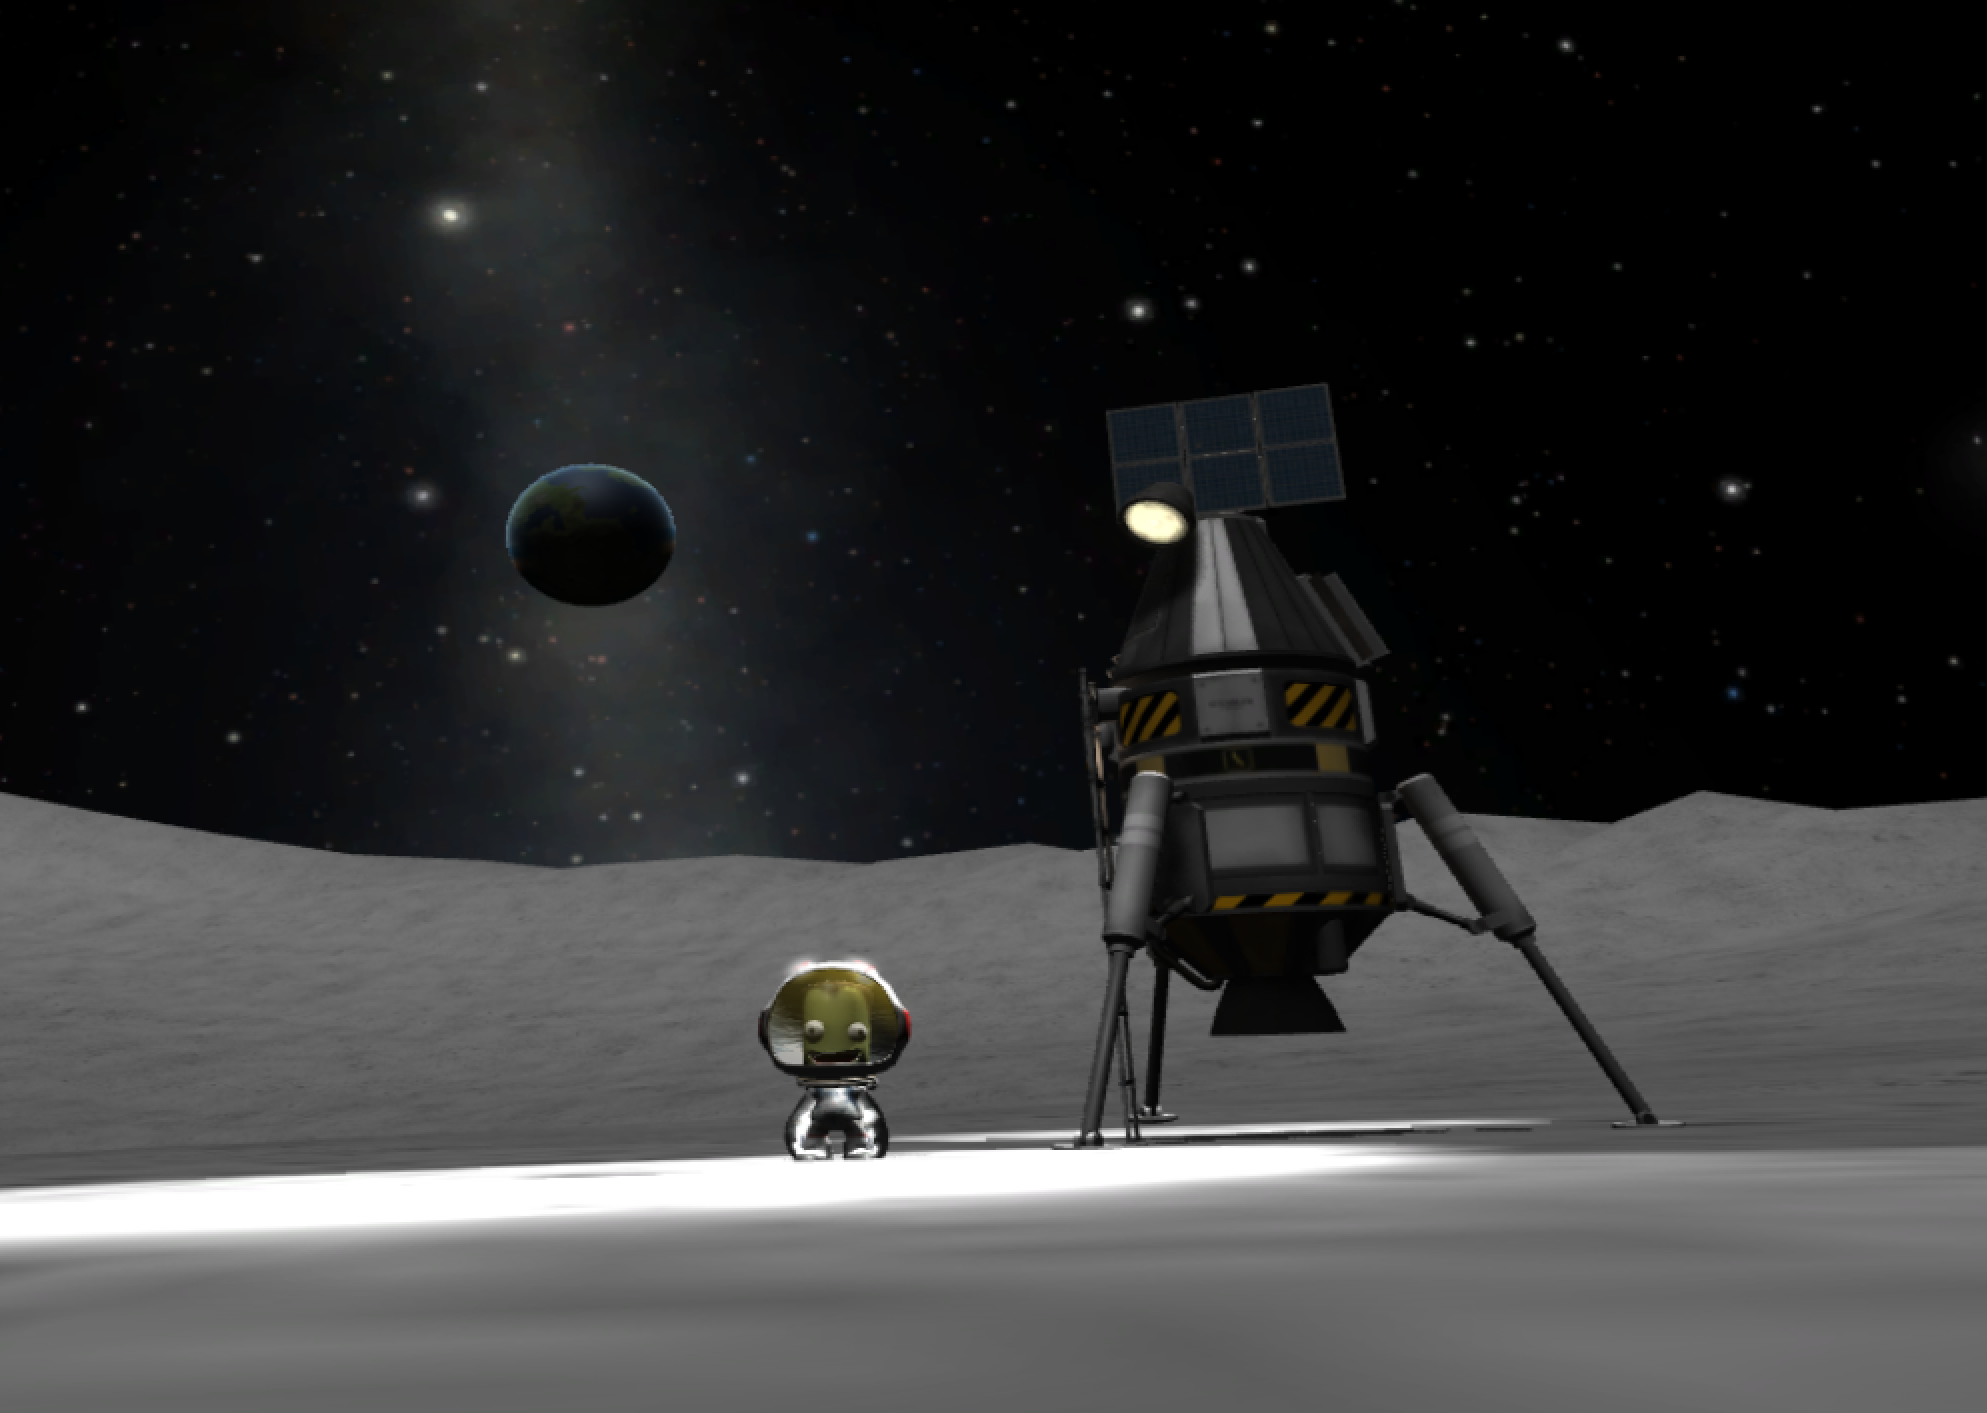 A kerbal stands proudly on the moon next to a small, three-legged lander. In the background is Kerbin, set against the milky way.